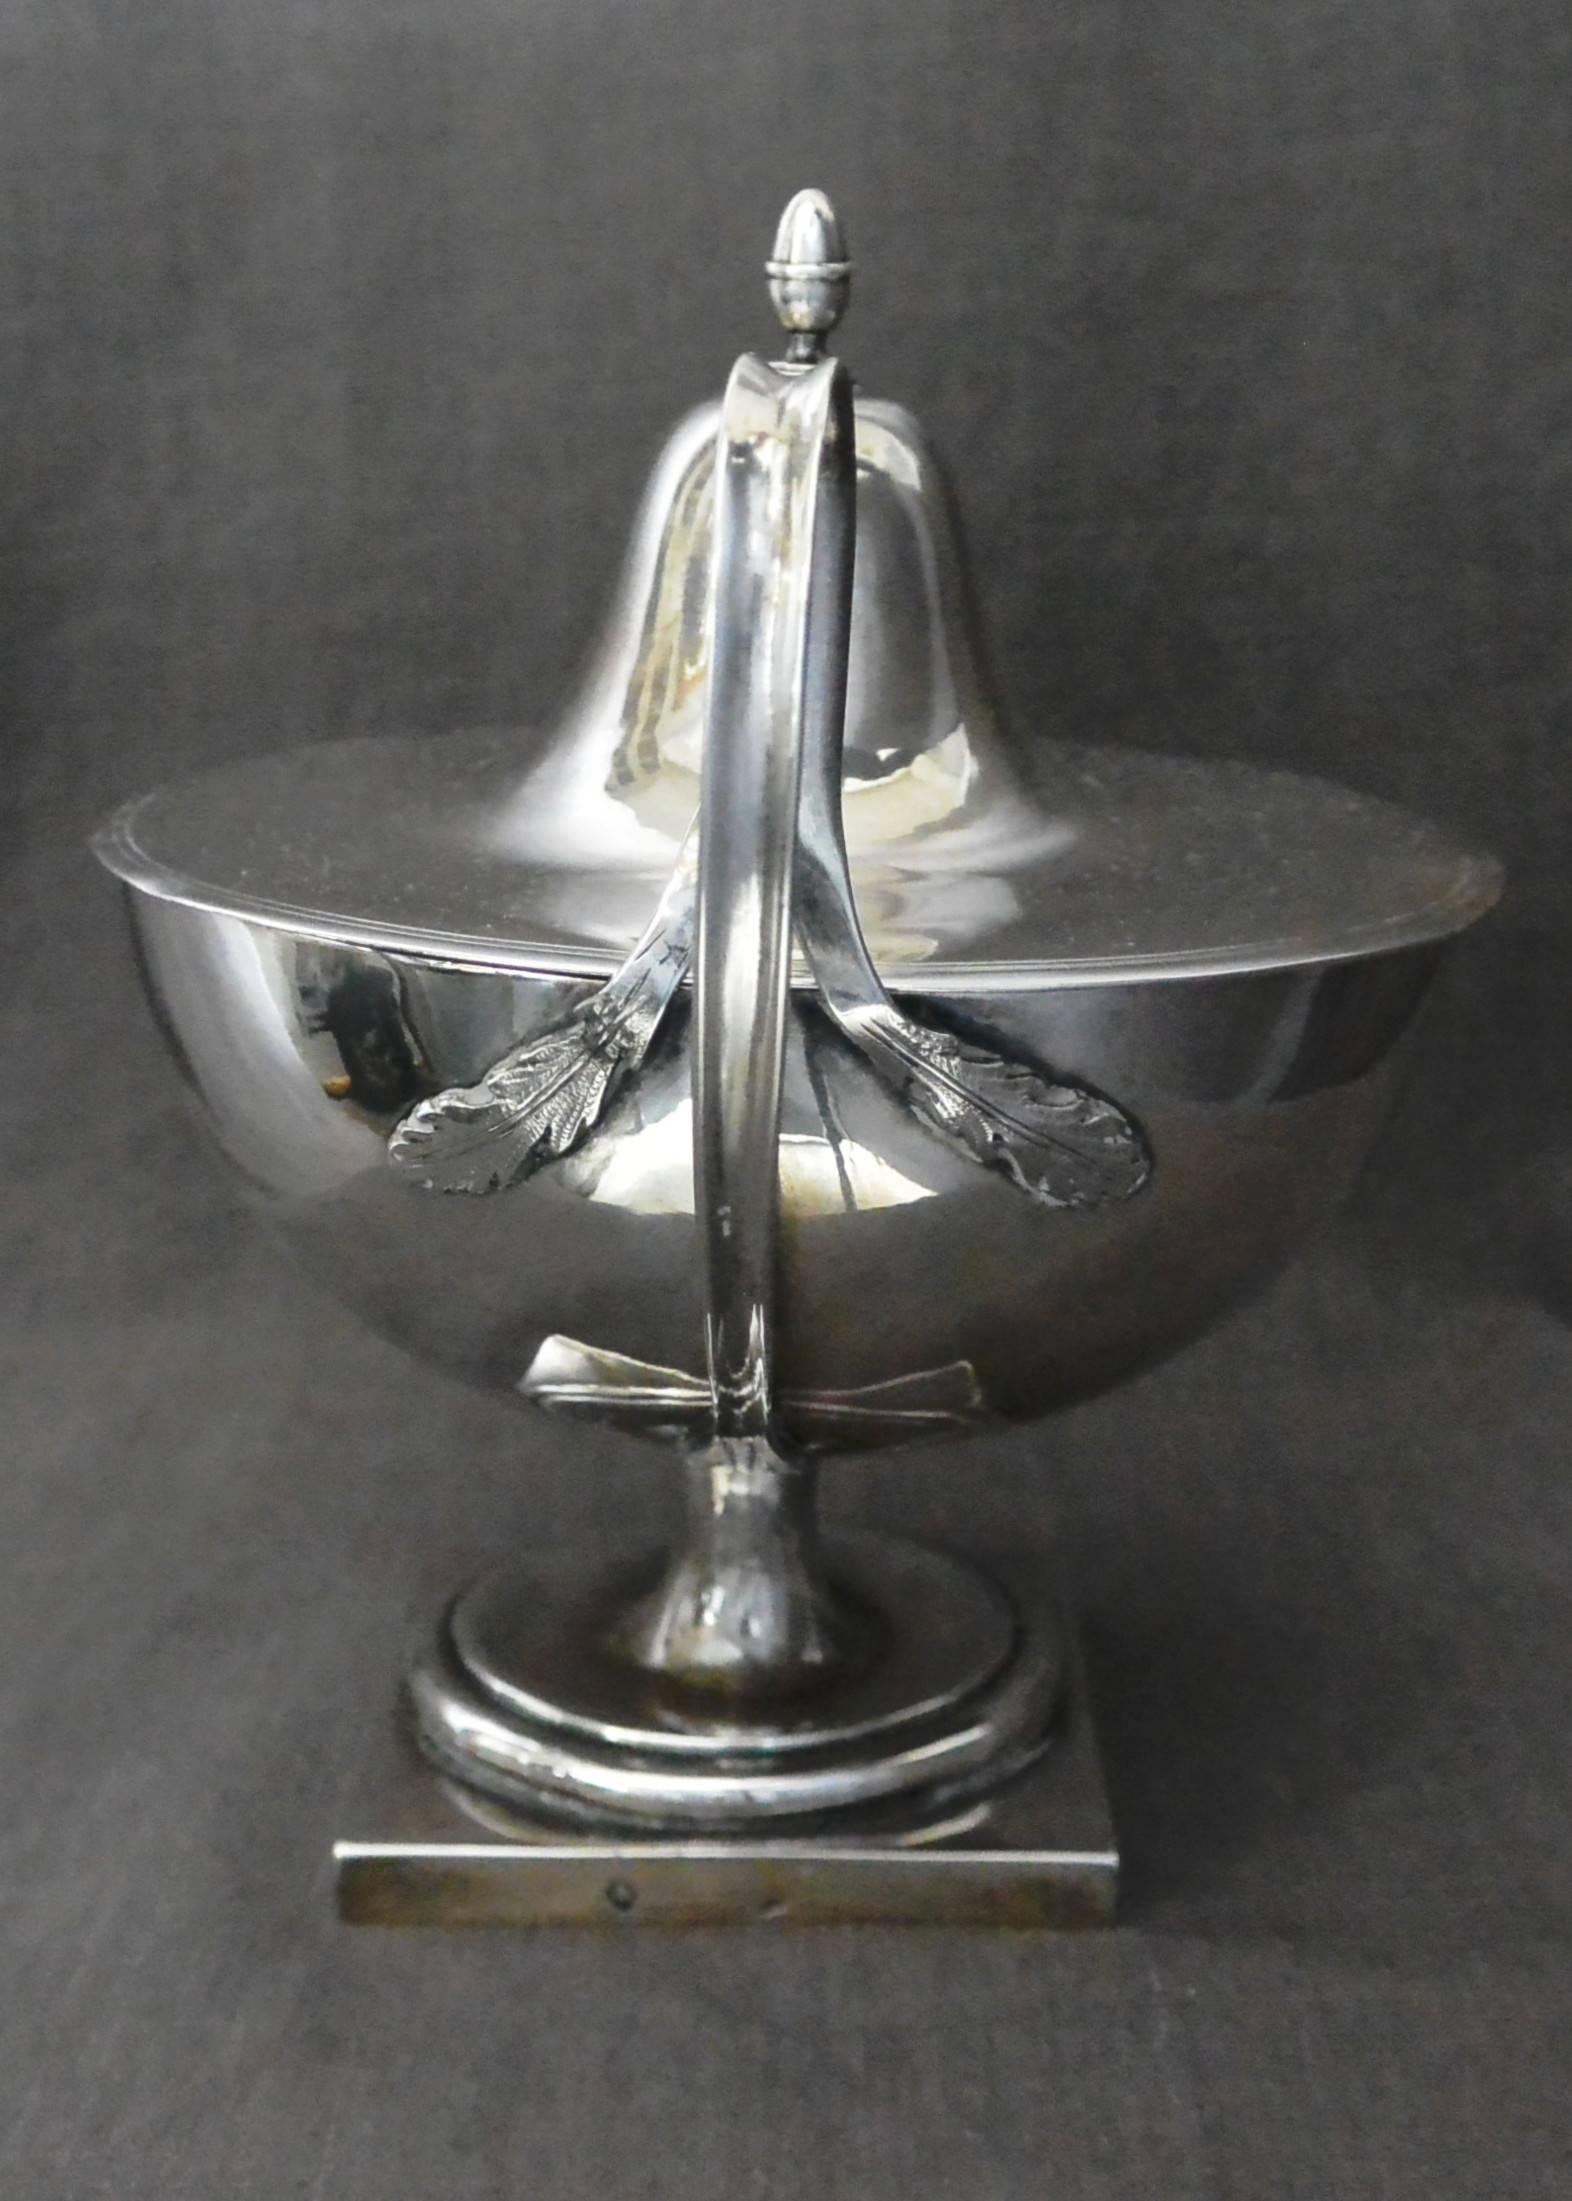  Italian Silver Neoclassical Lidded Urn. Italian neoclassical sterling silver urn form zucchiera. Handles with foliate terminals and lid with acorn finial all on footed pedestal base. Italy, circa 1780.
Dimension: handle to handle 7.75